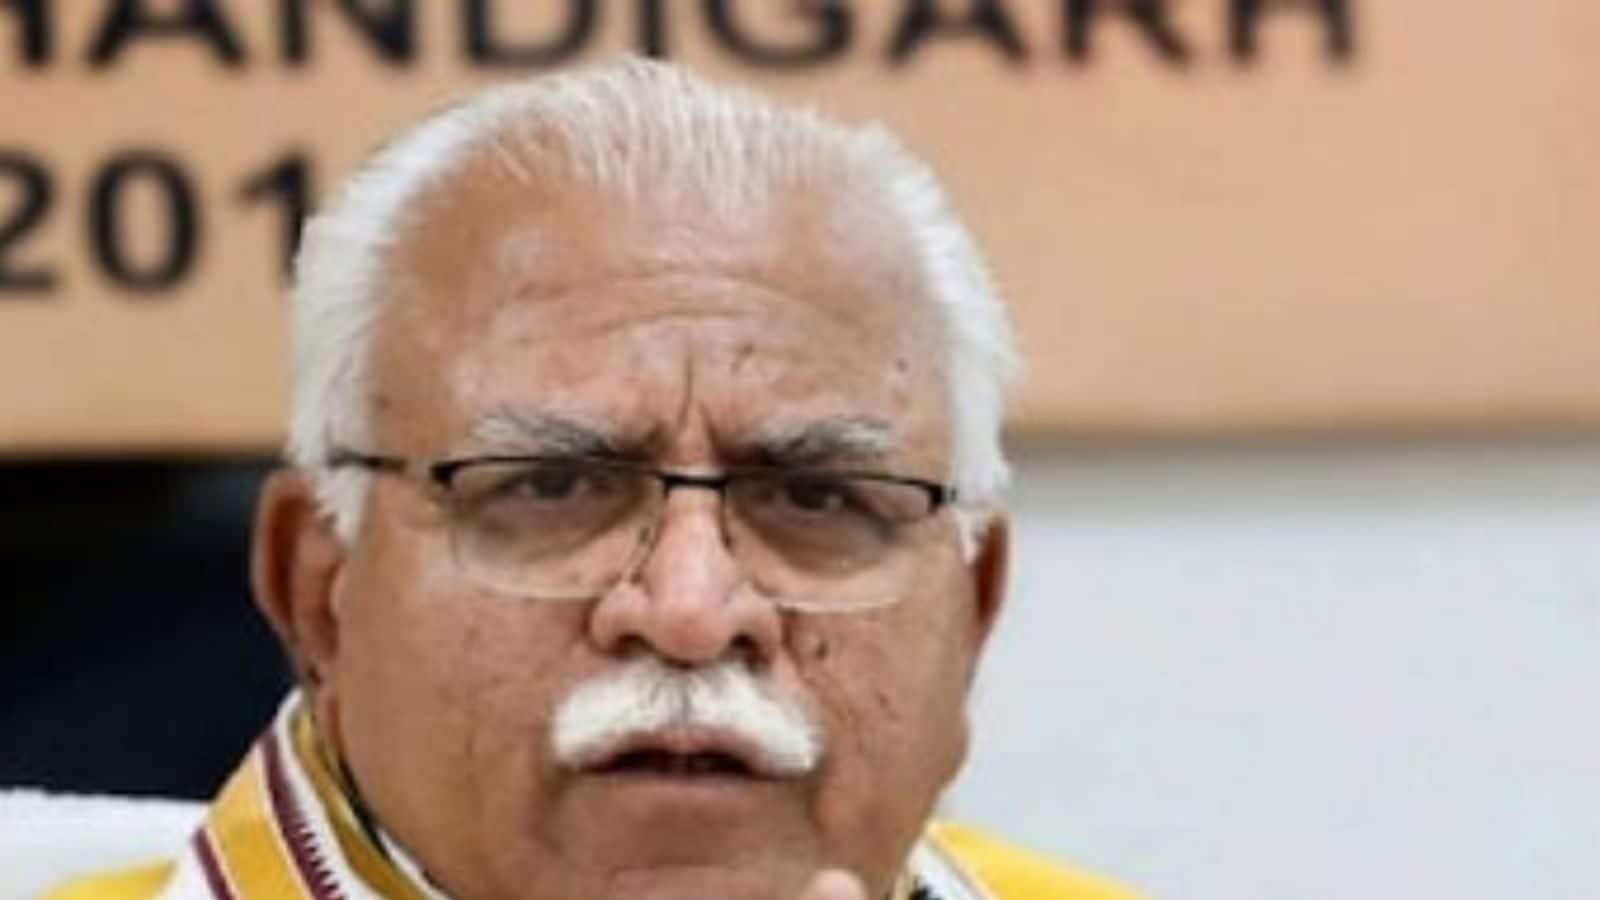 Smartwatches are CM Khattar’s Latest Idea to Track Attendance, Movement of Govt Officials in Haryana